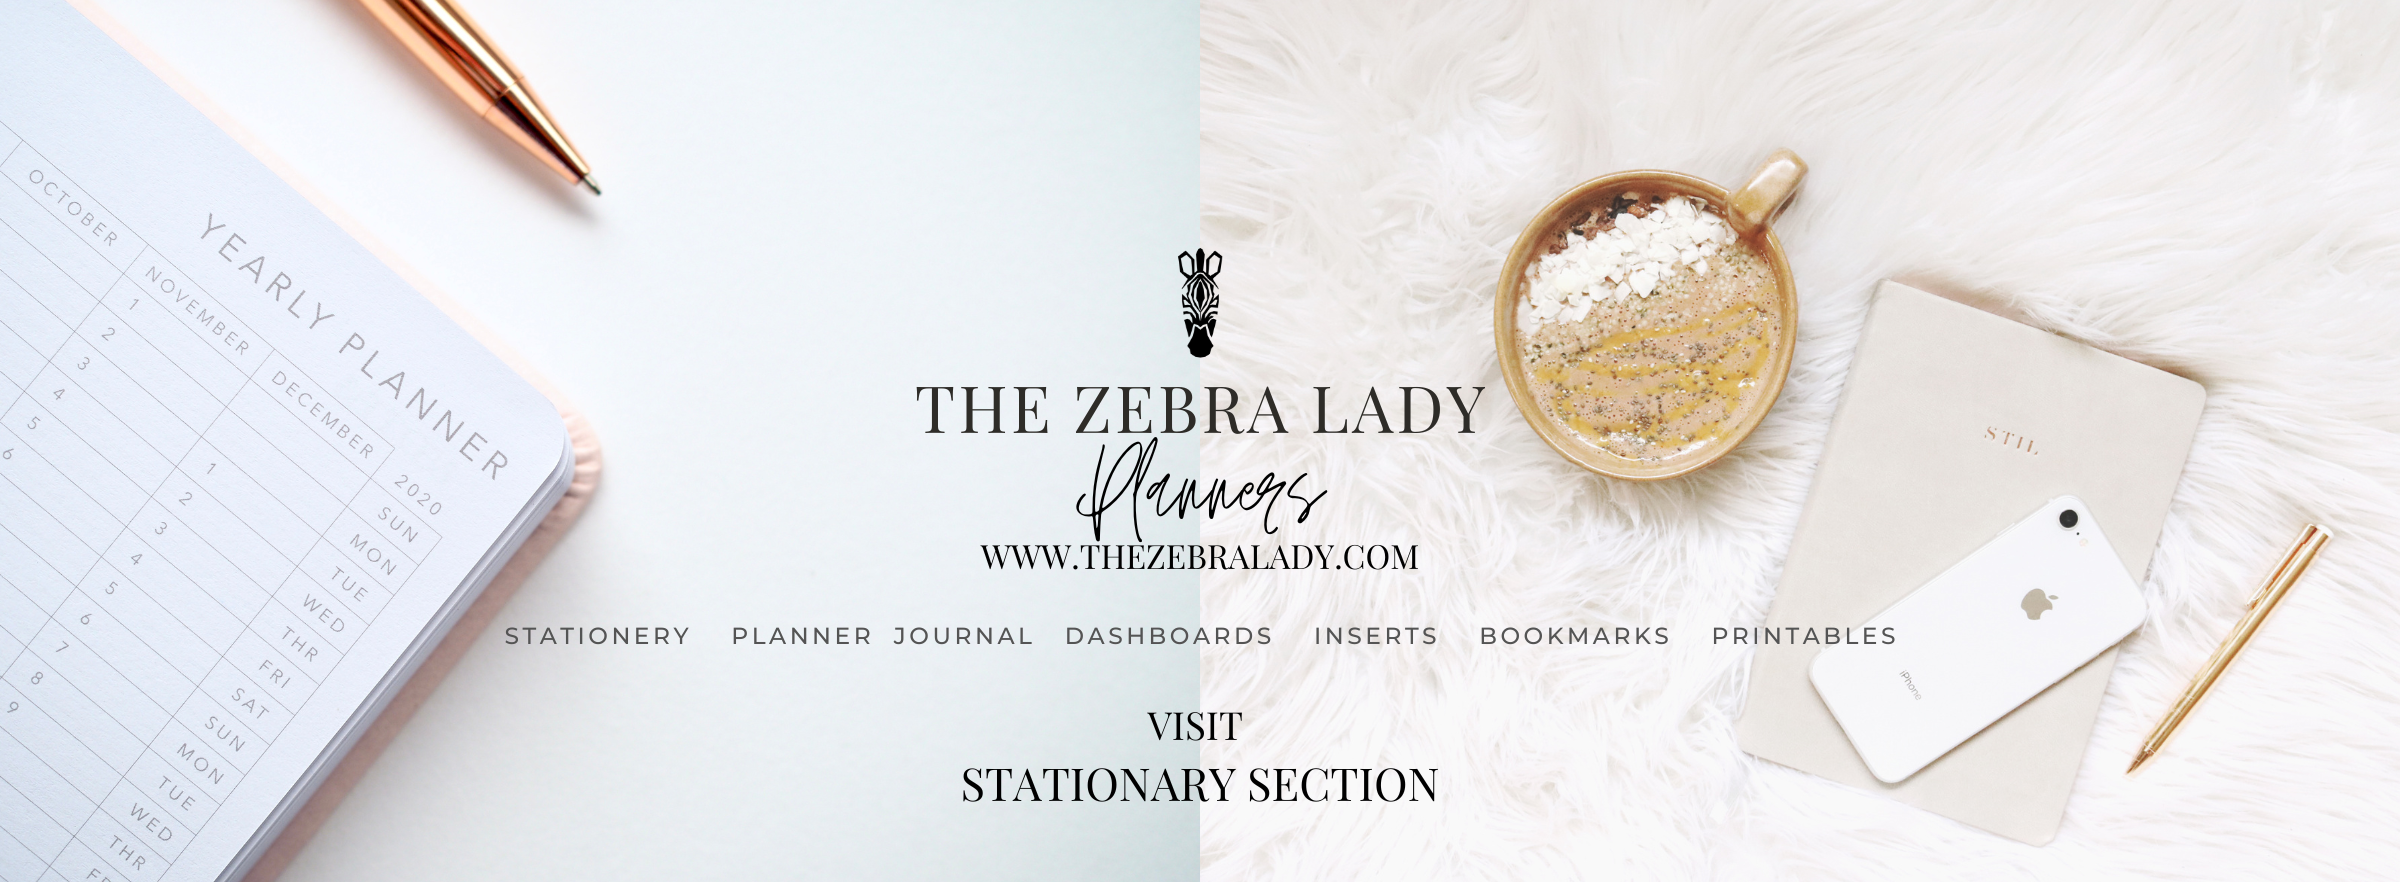 001m stationery planner banners THE ZEBRA LADY  banner.png